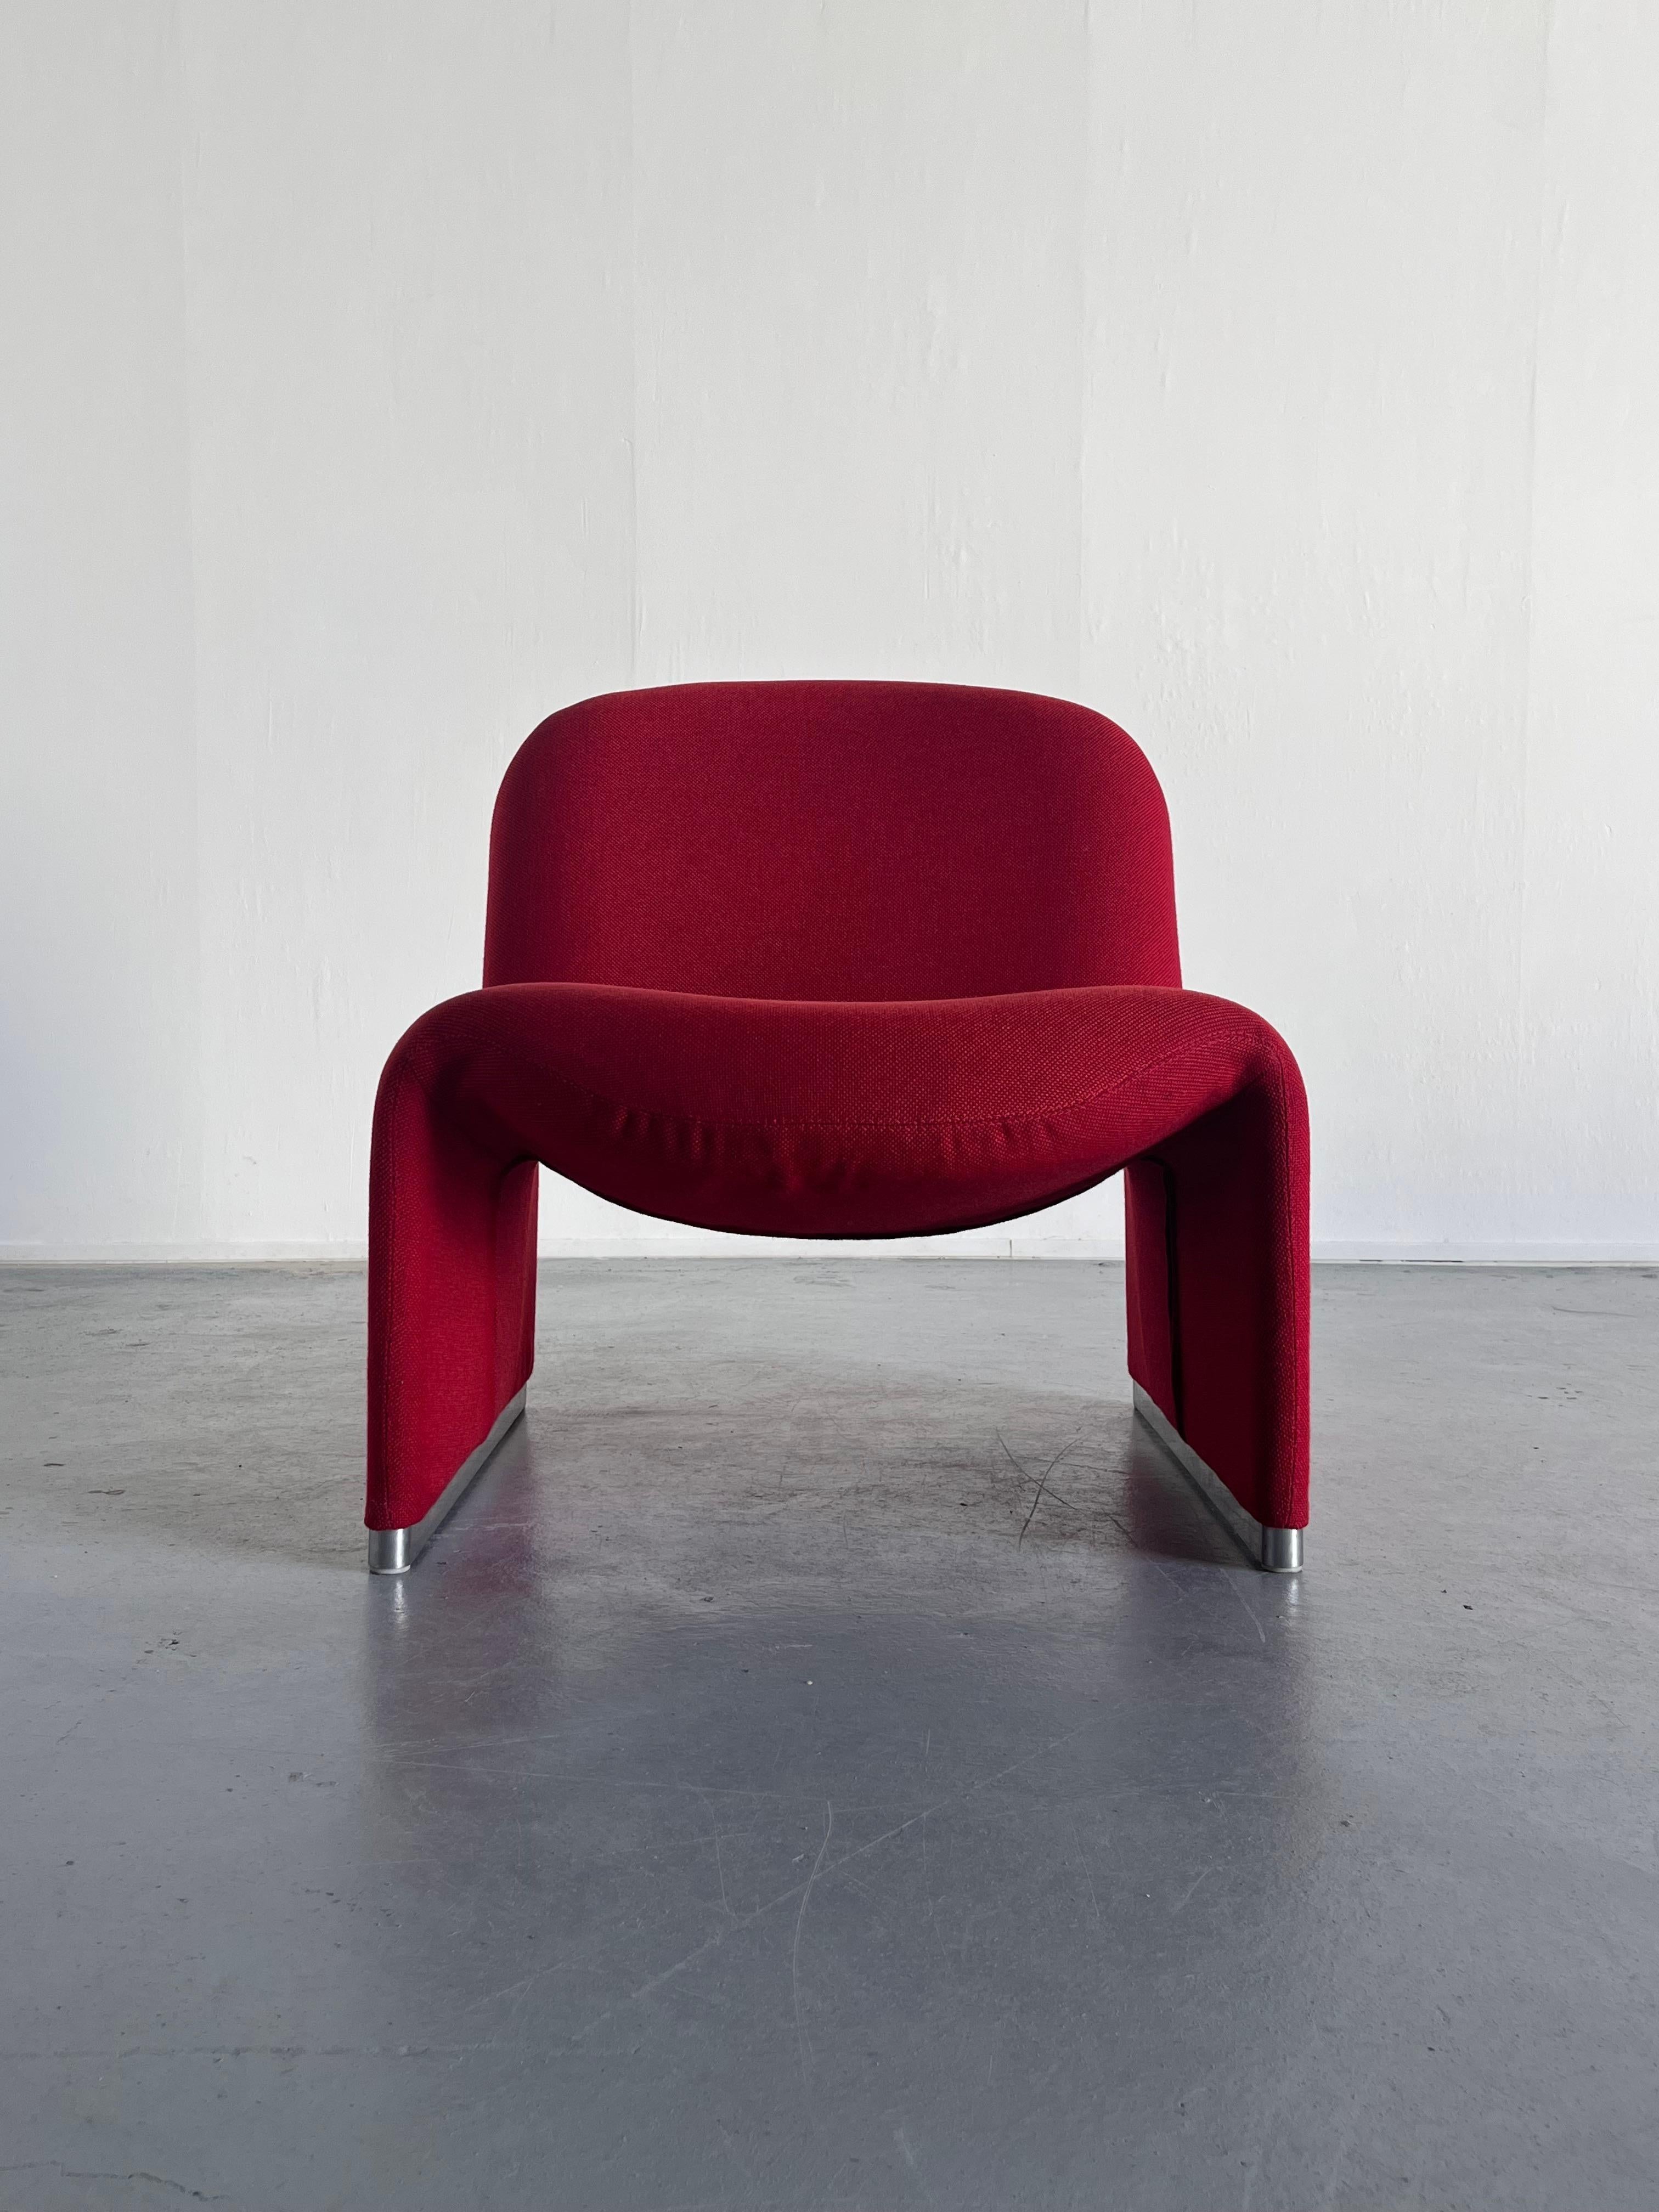 1 of 2 Iconic 'Alky' chairs by Giancarlo Piretti for Anonima Castelli, 1970s 2